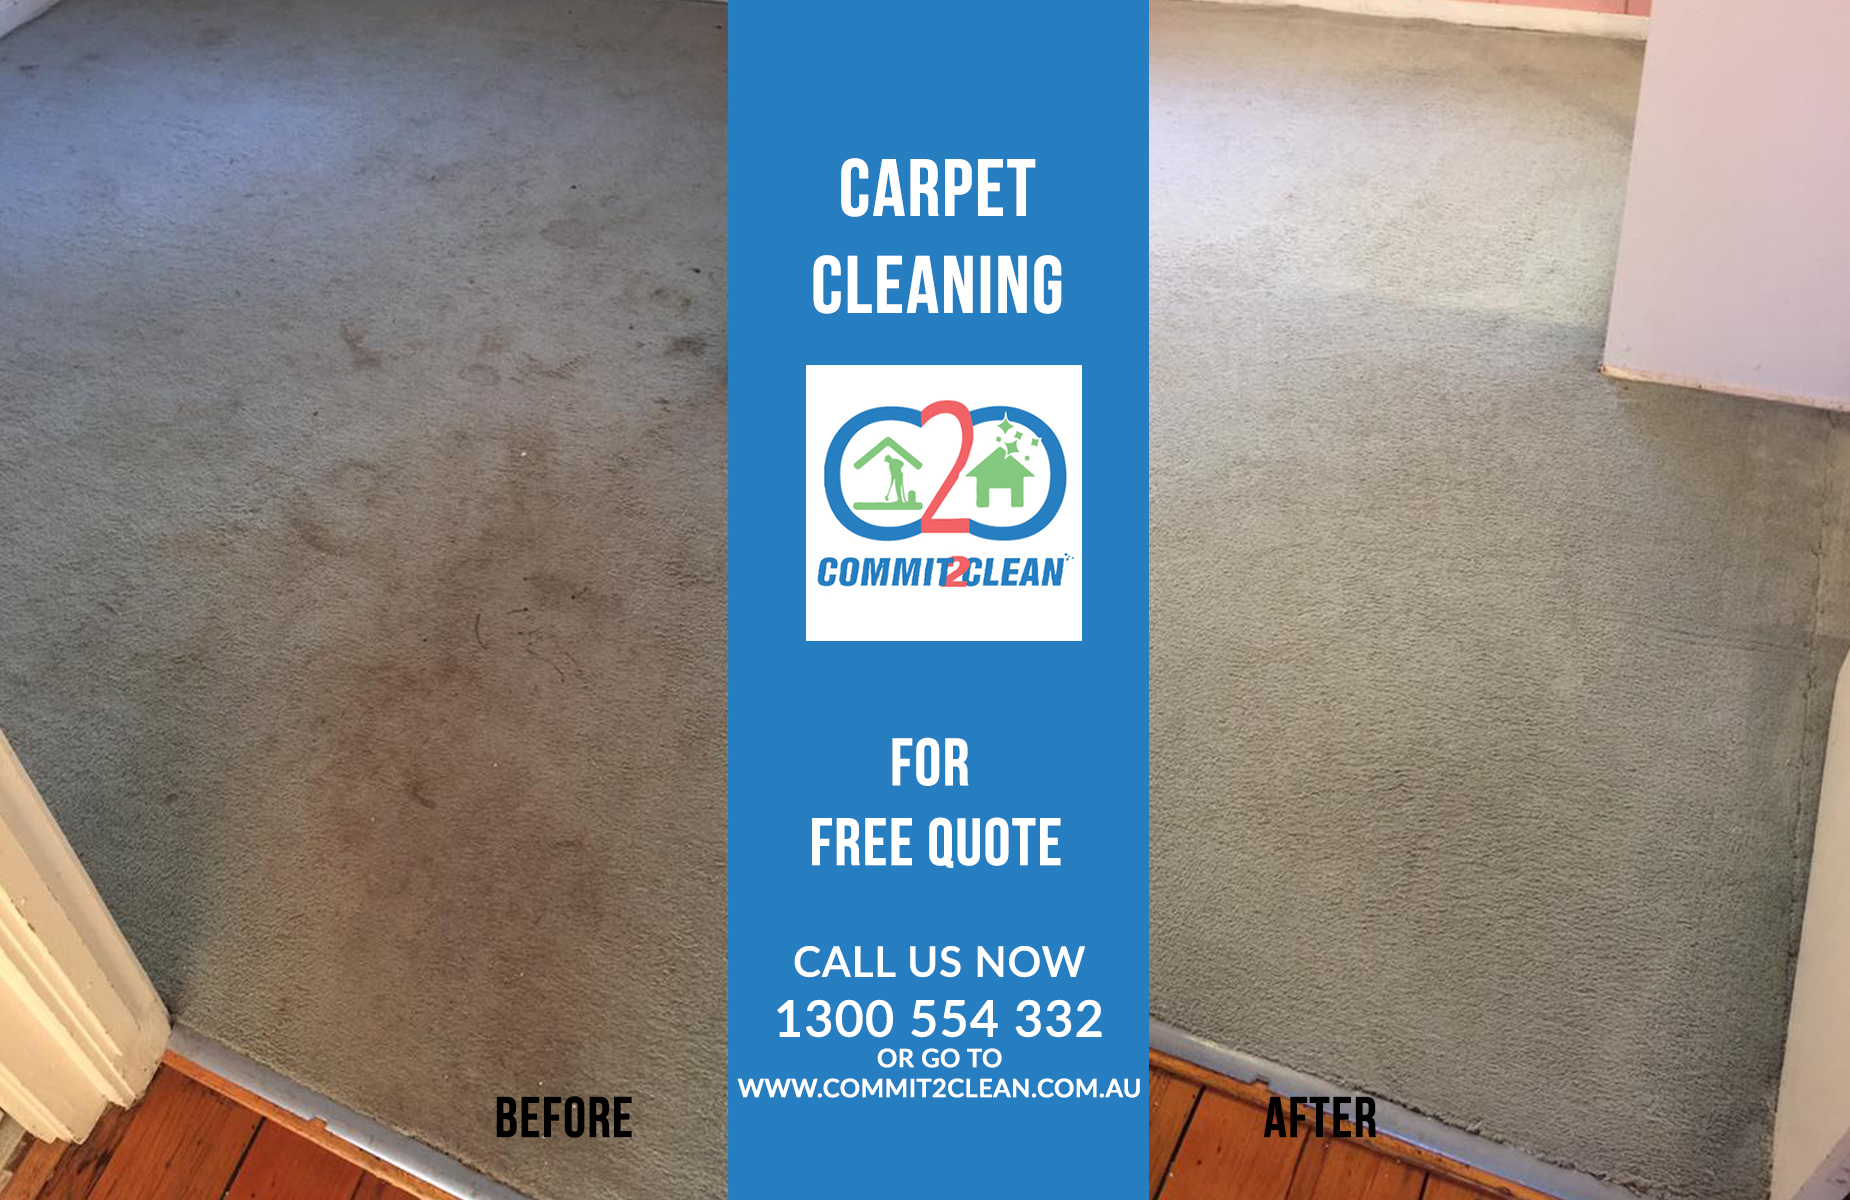 Are you searching for carpet cleaning tips?